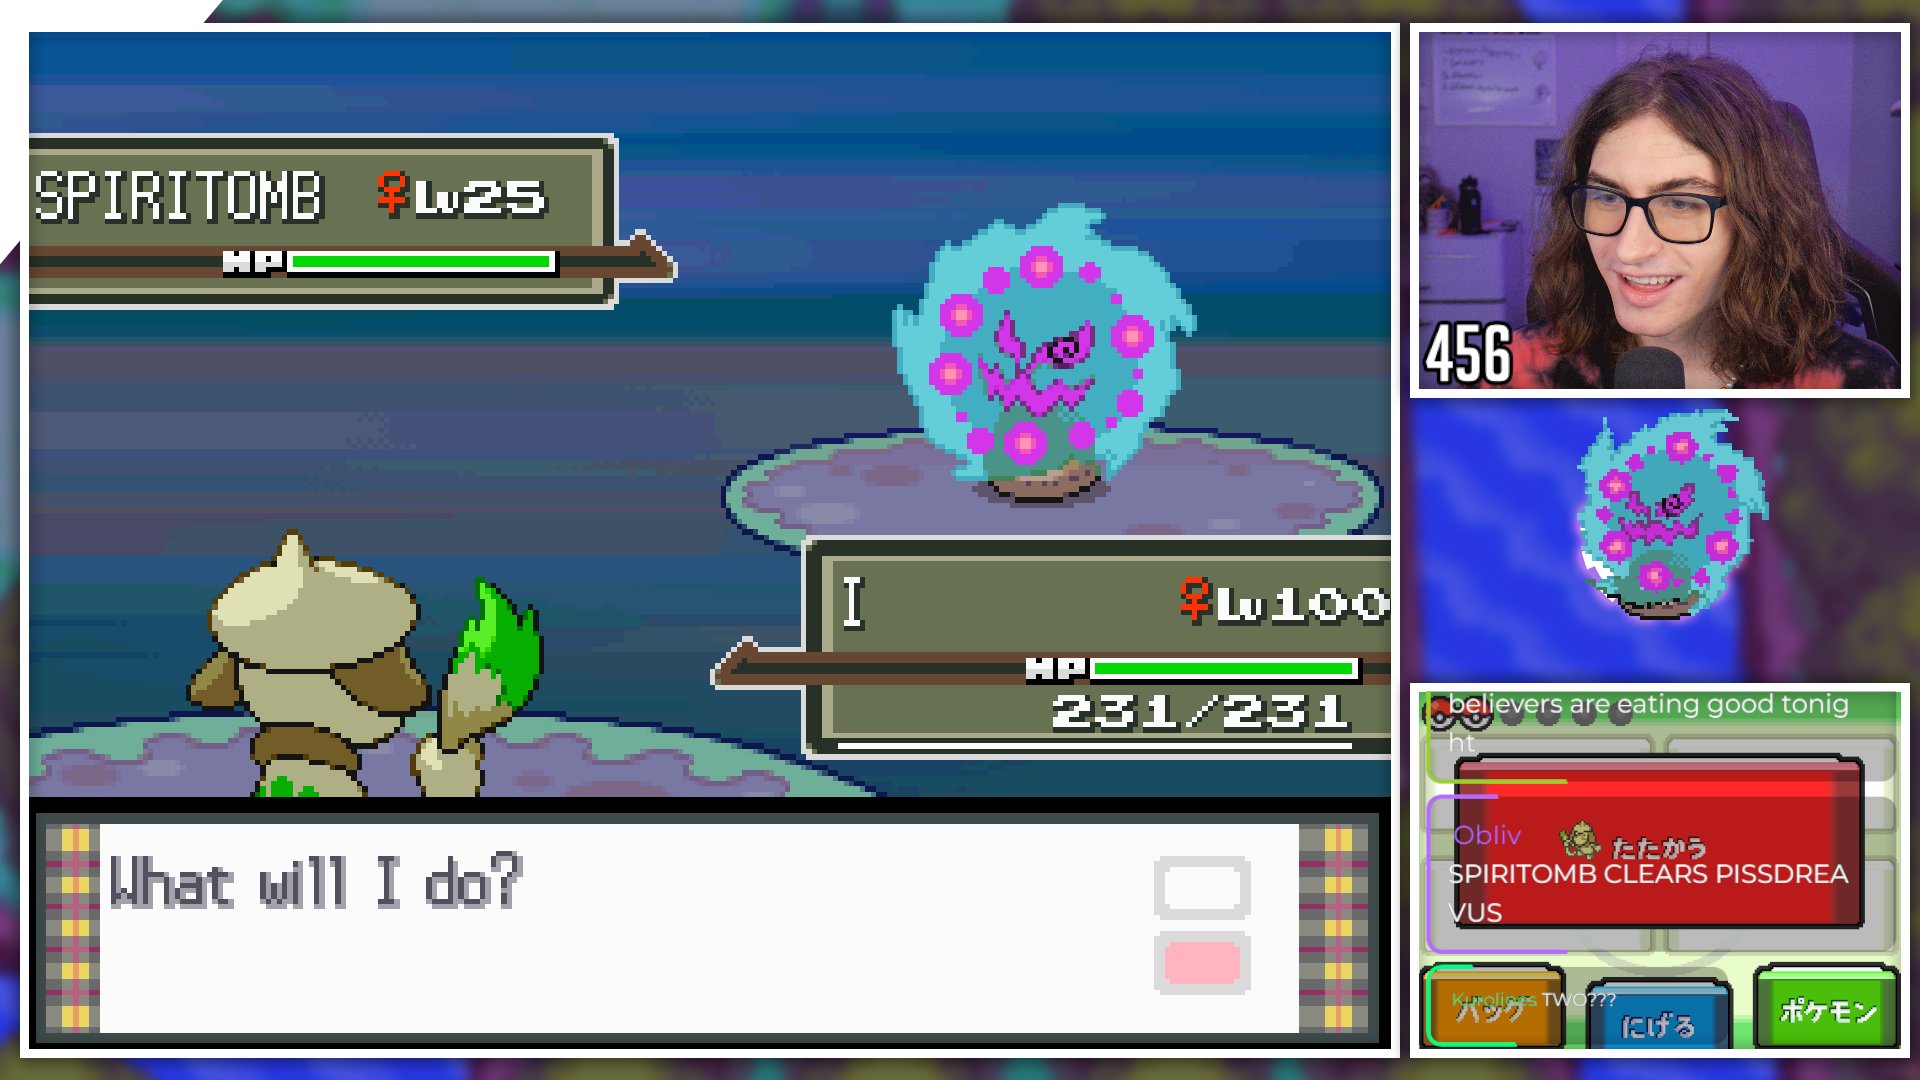 Sabian on X: WE ALREADY GOT SPIRITOMB IN UNDER AN HOUR LOL 456 RESETS ARE  YOU KIDDING ME  / X